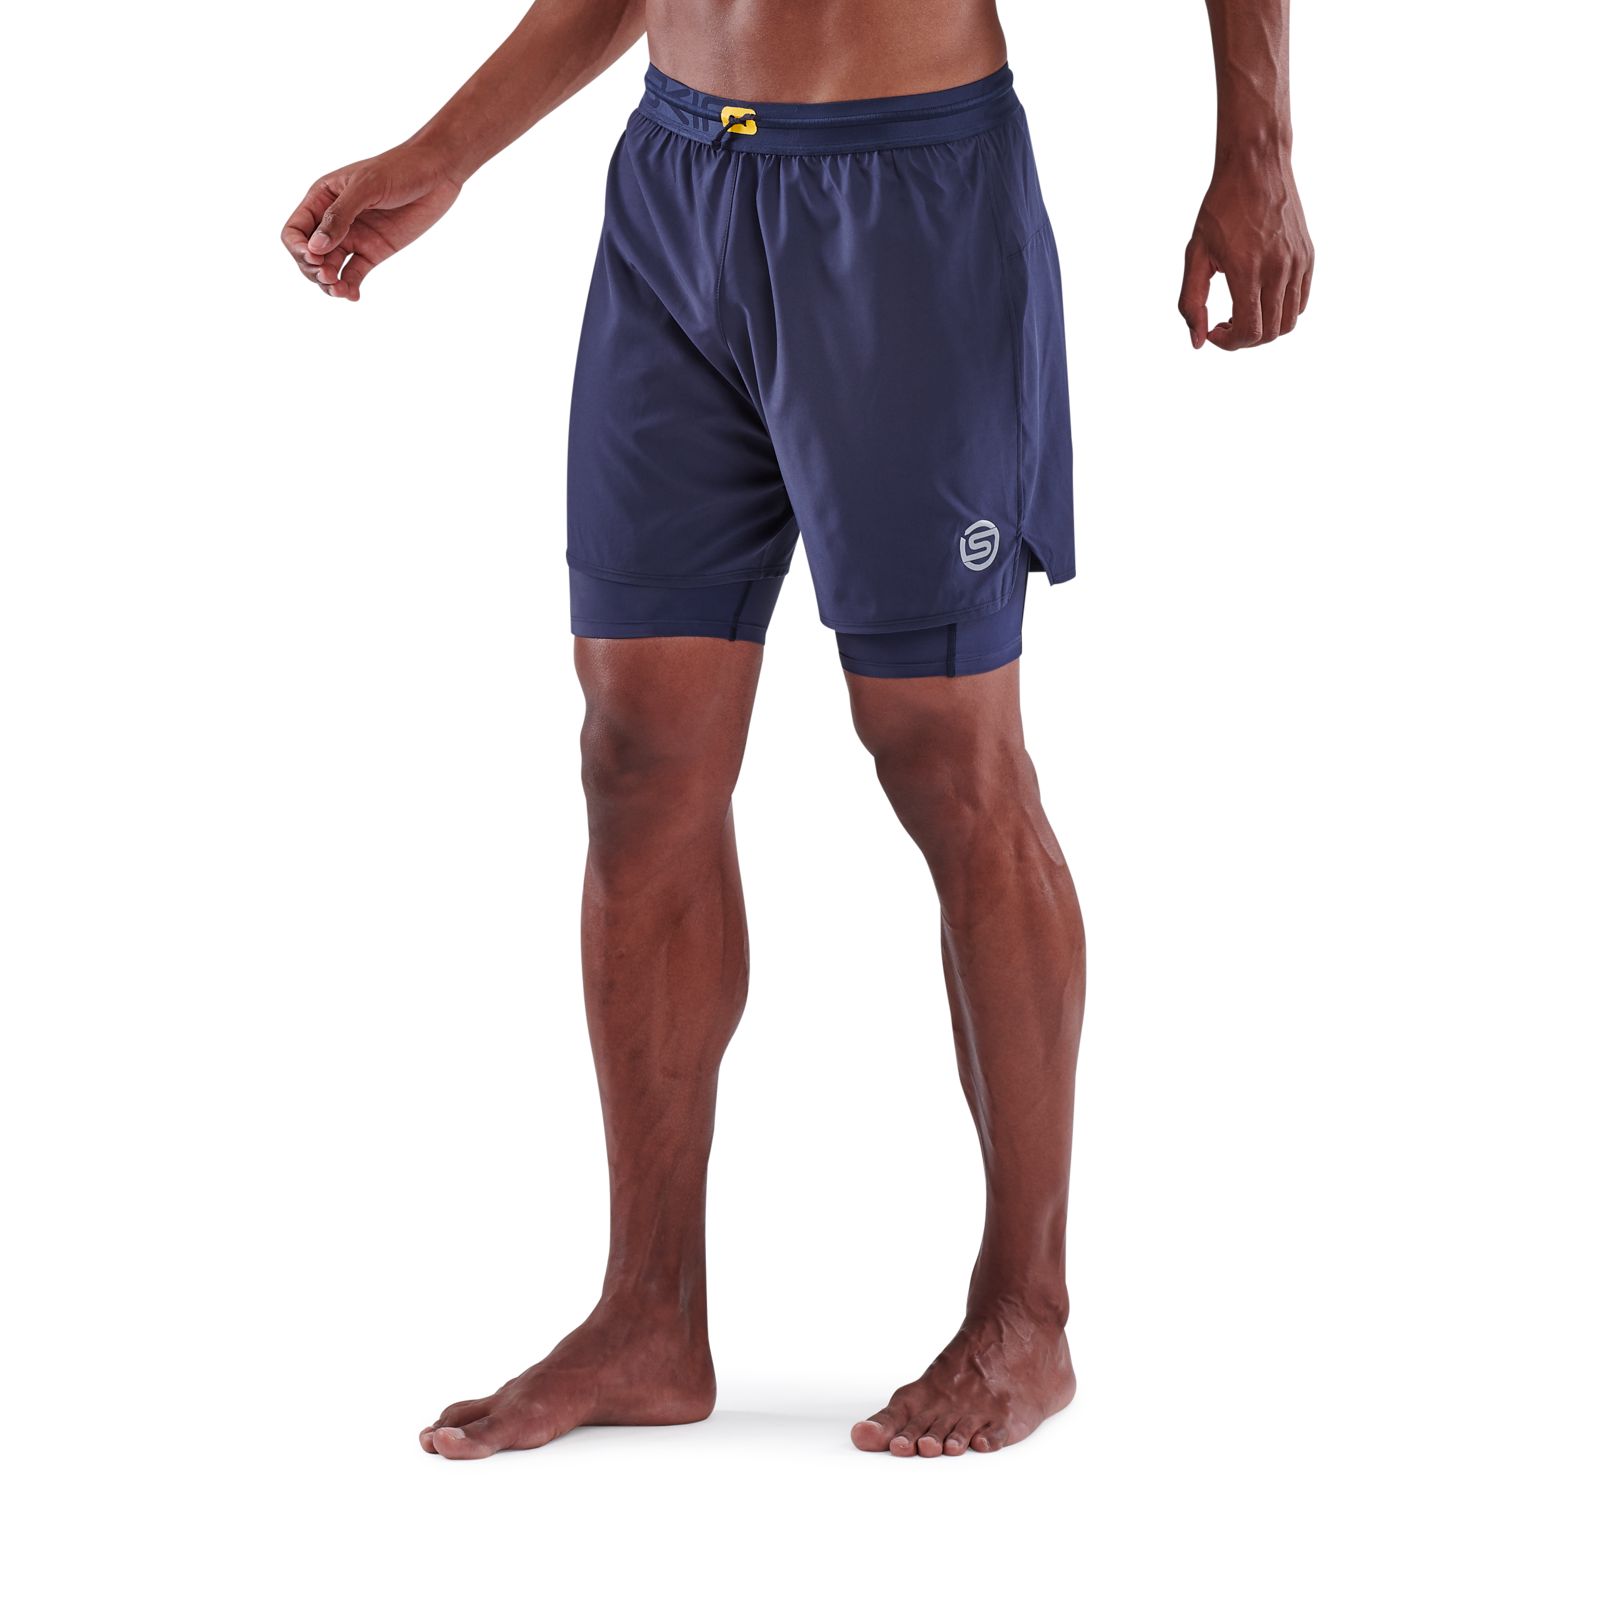 NDS Wear Men's 3/4 Compression Active Tights Color Navy - ABC Underwear